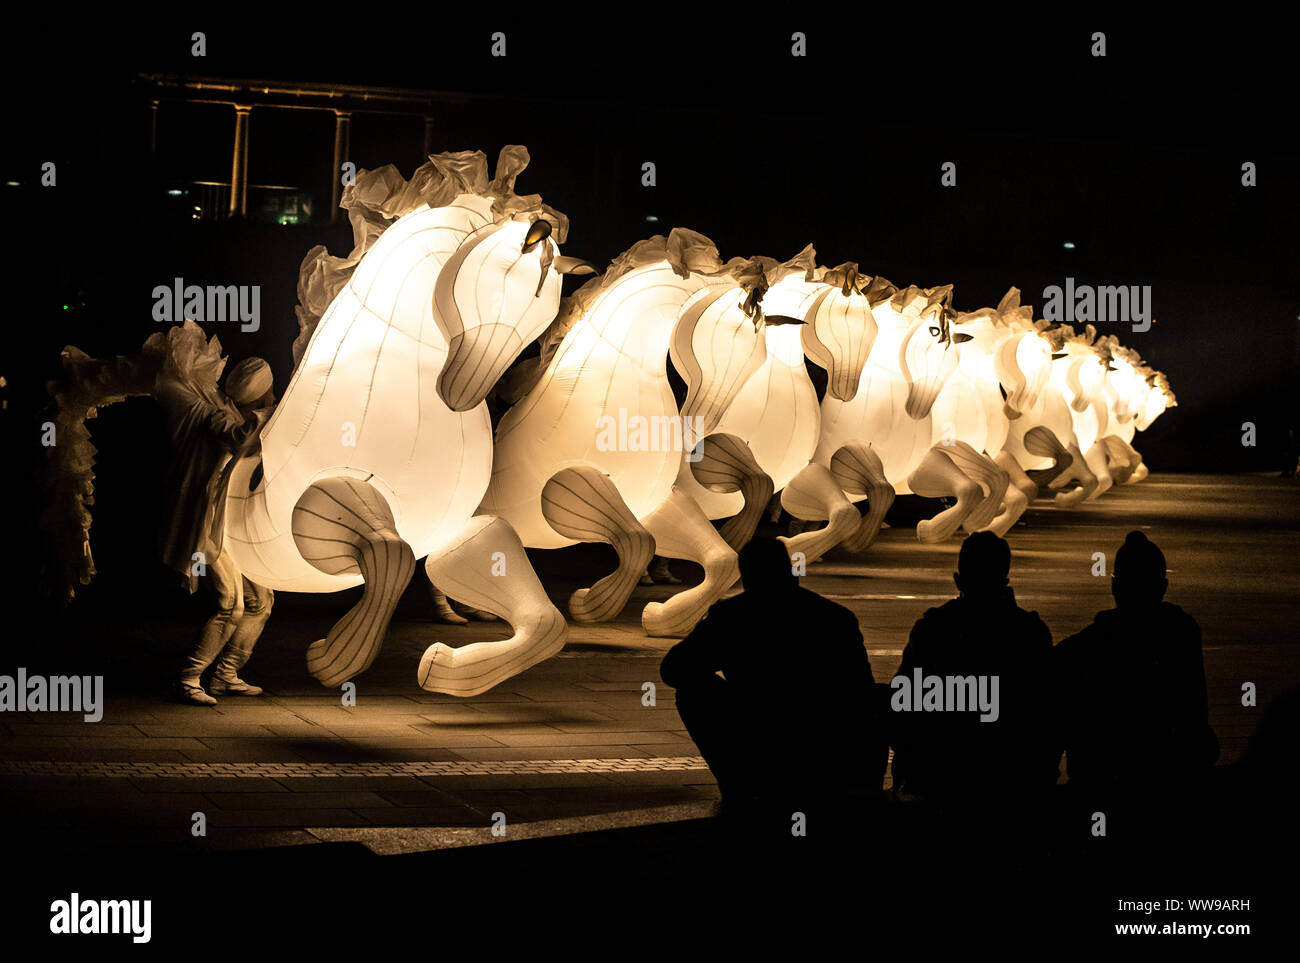 Inflatable glowing white horses perform during arts production FierS a Cheval at the Grade I listed Piece Hall, in Halifax, Yorkshire. Stock Photo